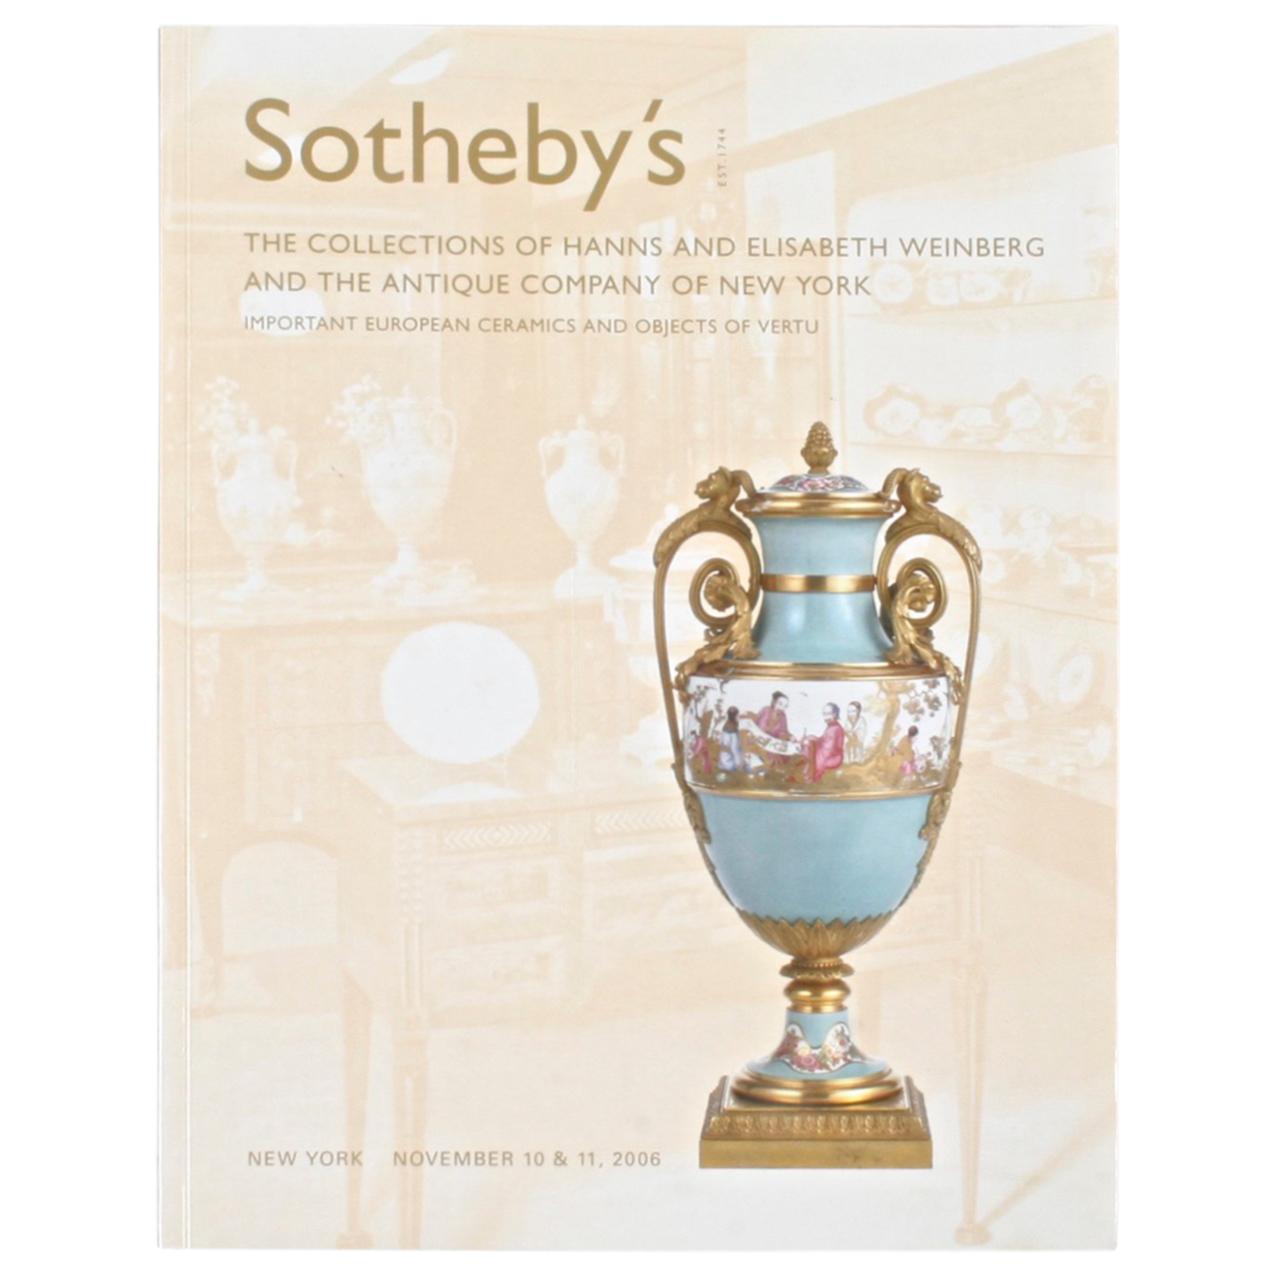 Sotheby's the Collections of Hanns and Elisabeth Weinberg & the Antique Company